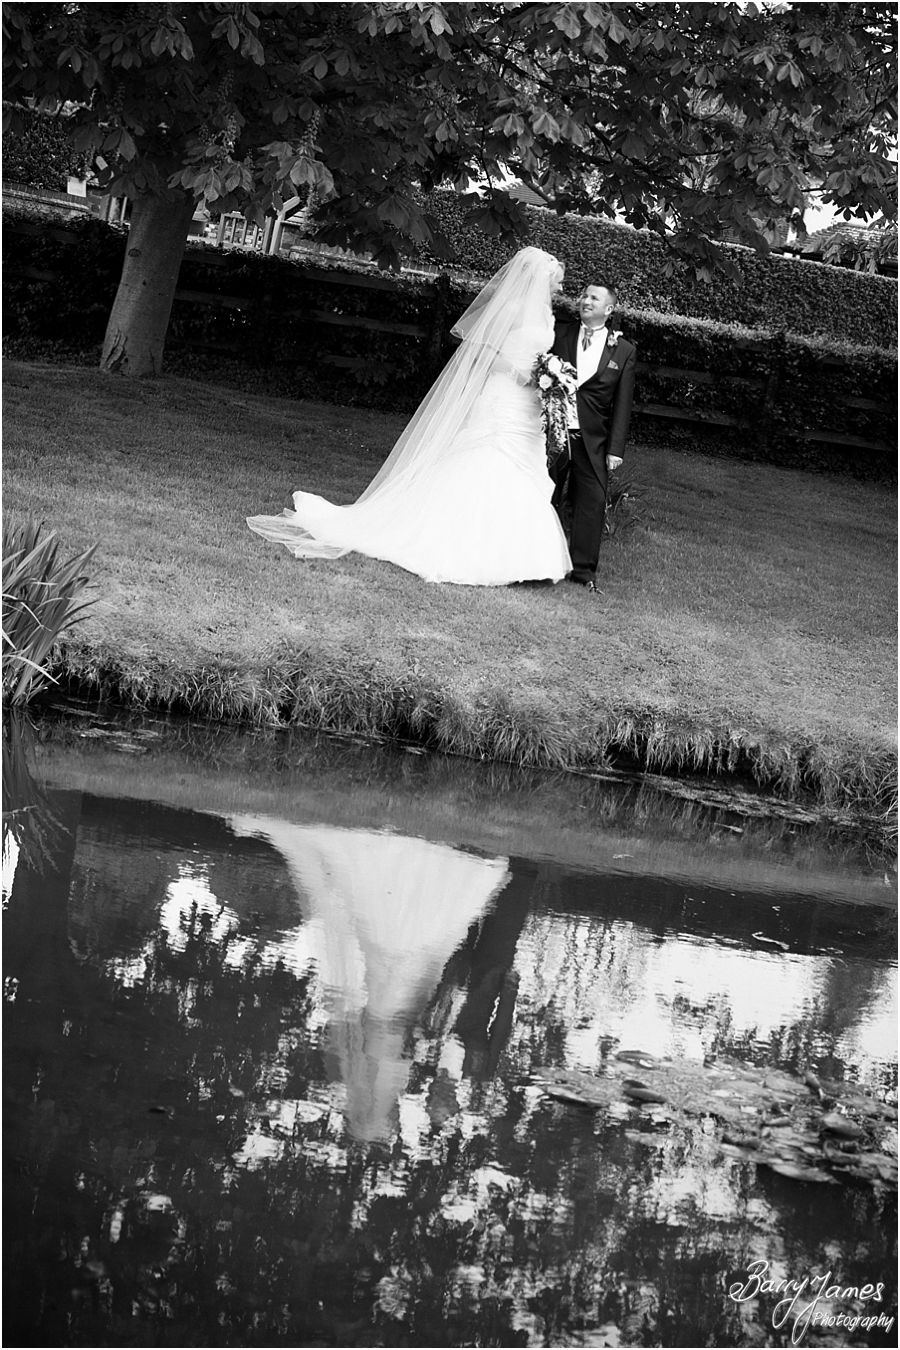 Relaxed timeless wedding photography that captures a beautiful story at The Moat House in Acton Trussell by Recommended Full Time Wedding Photographer Barry James